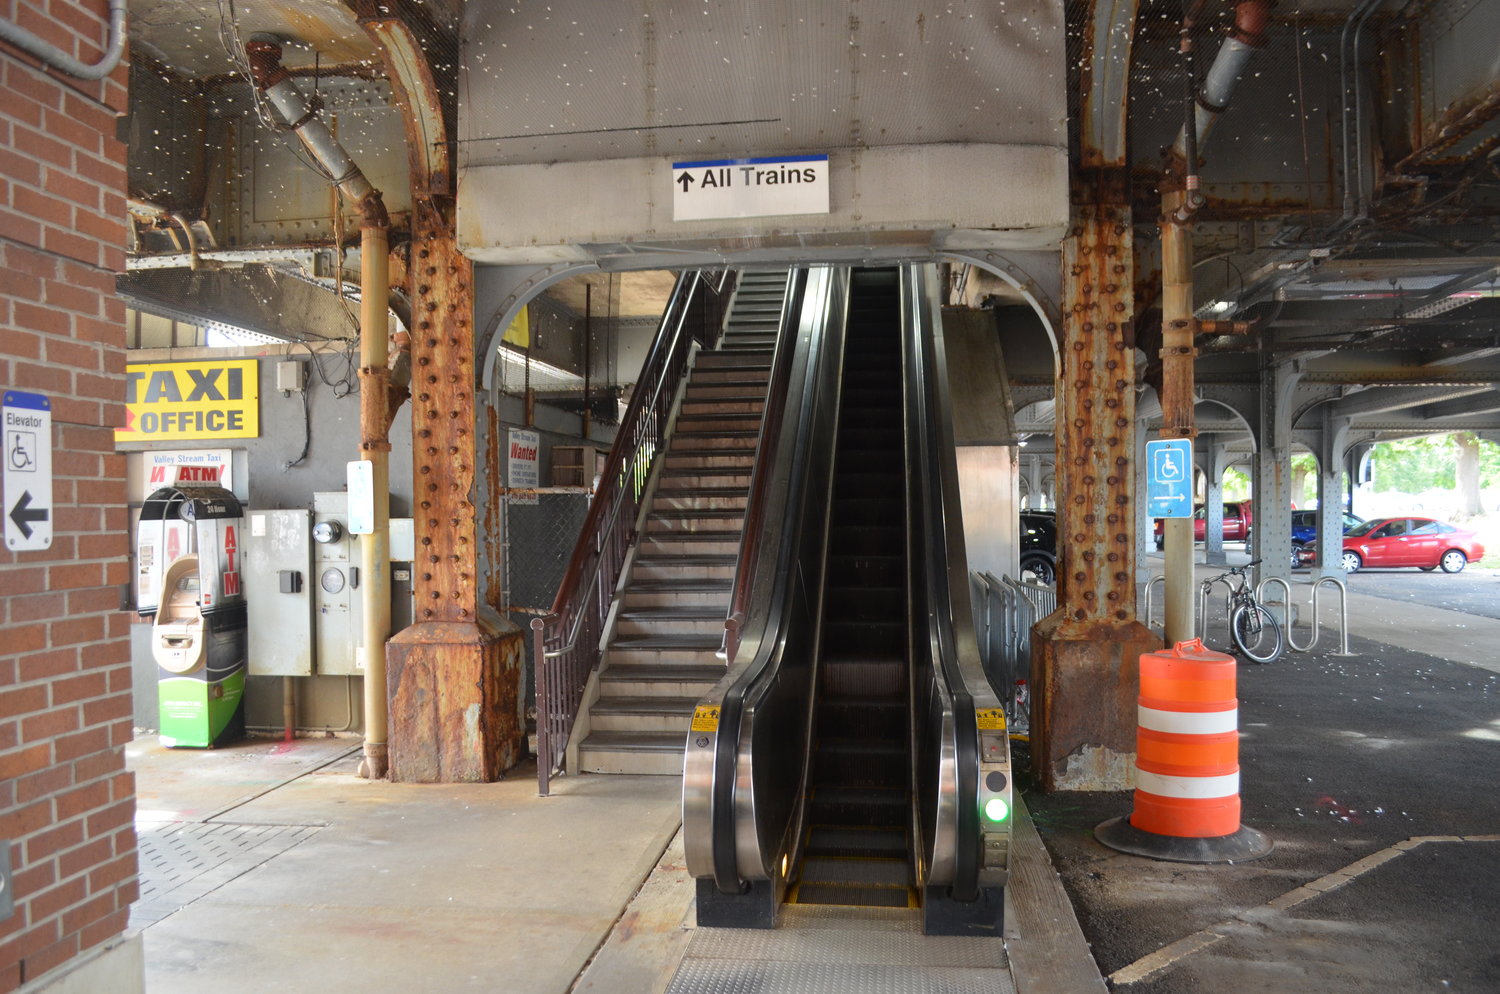 Mayor Edwin Fare joined Nassau County Executive Bruce Blakeman last week calling for major overhauls to Valley Stream’s Long Island Rail Road station, citing deteriorating conditions like crumbling concrete, weakened overpasses, and rusting steel.